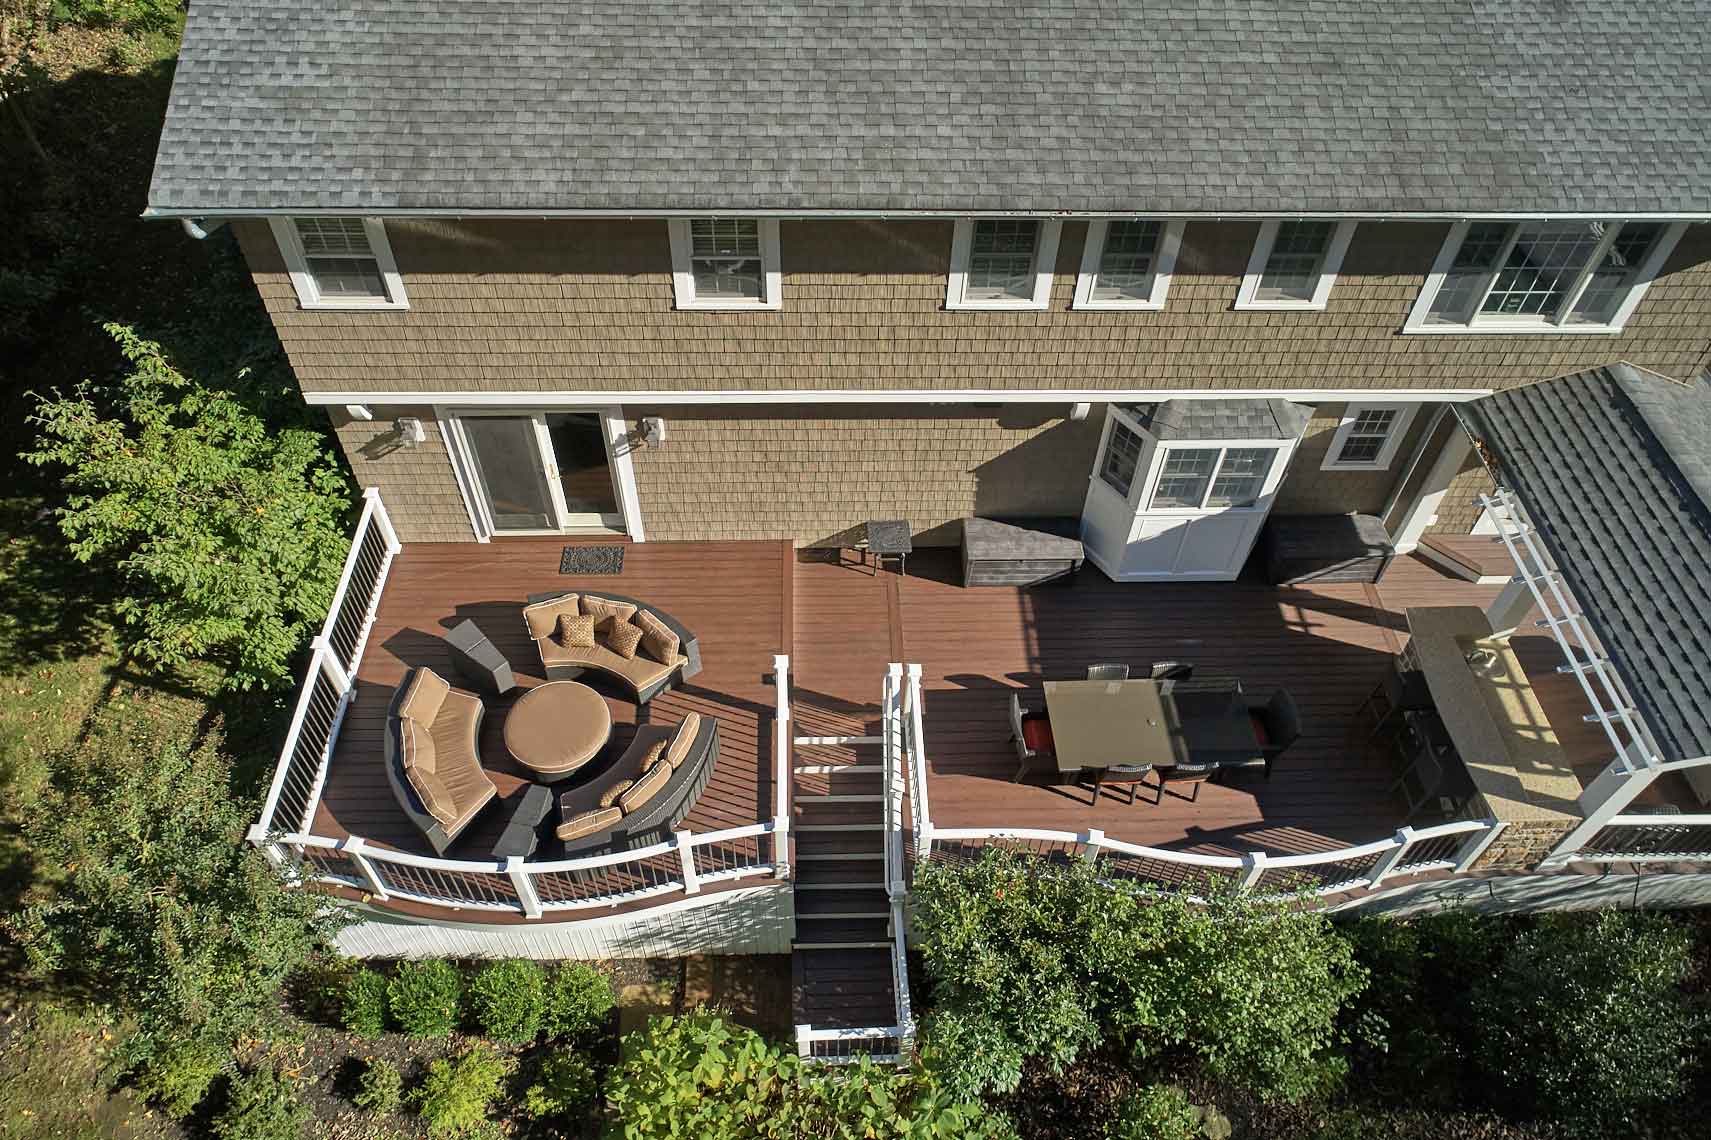 Heyward Hills Home Renovation - Patio from Above